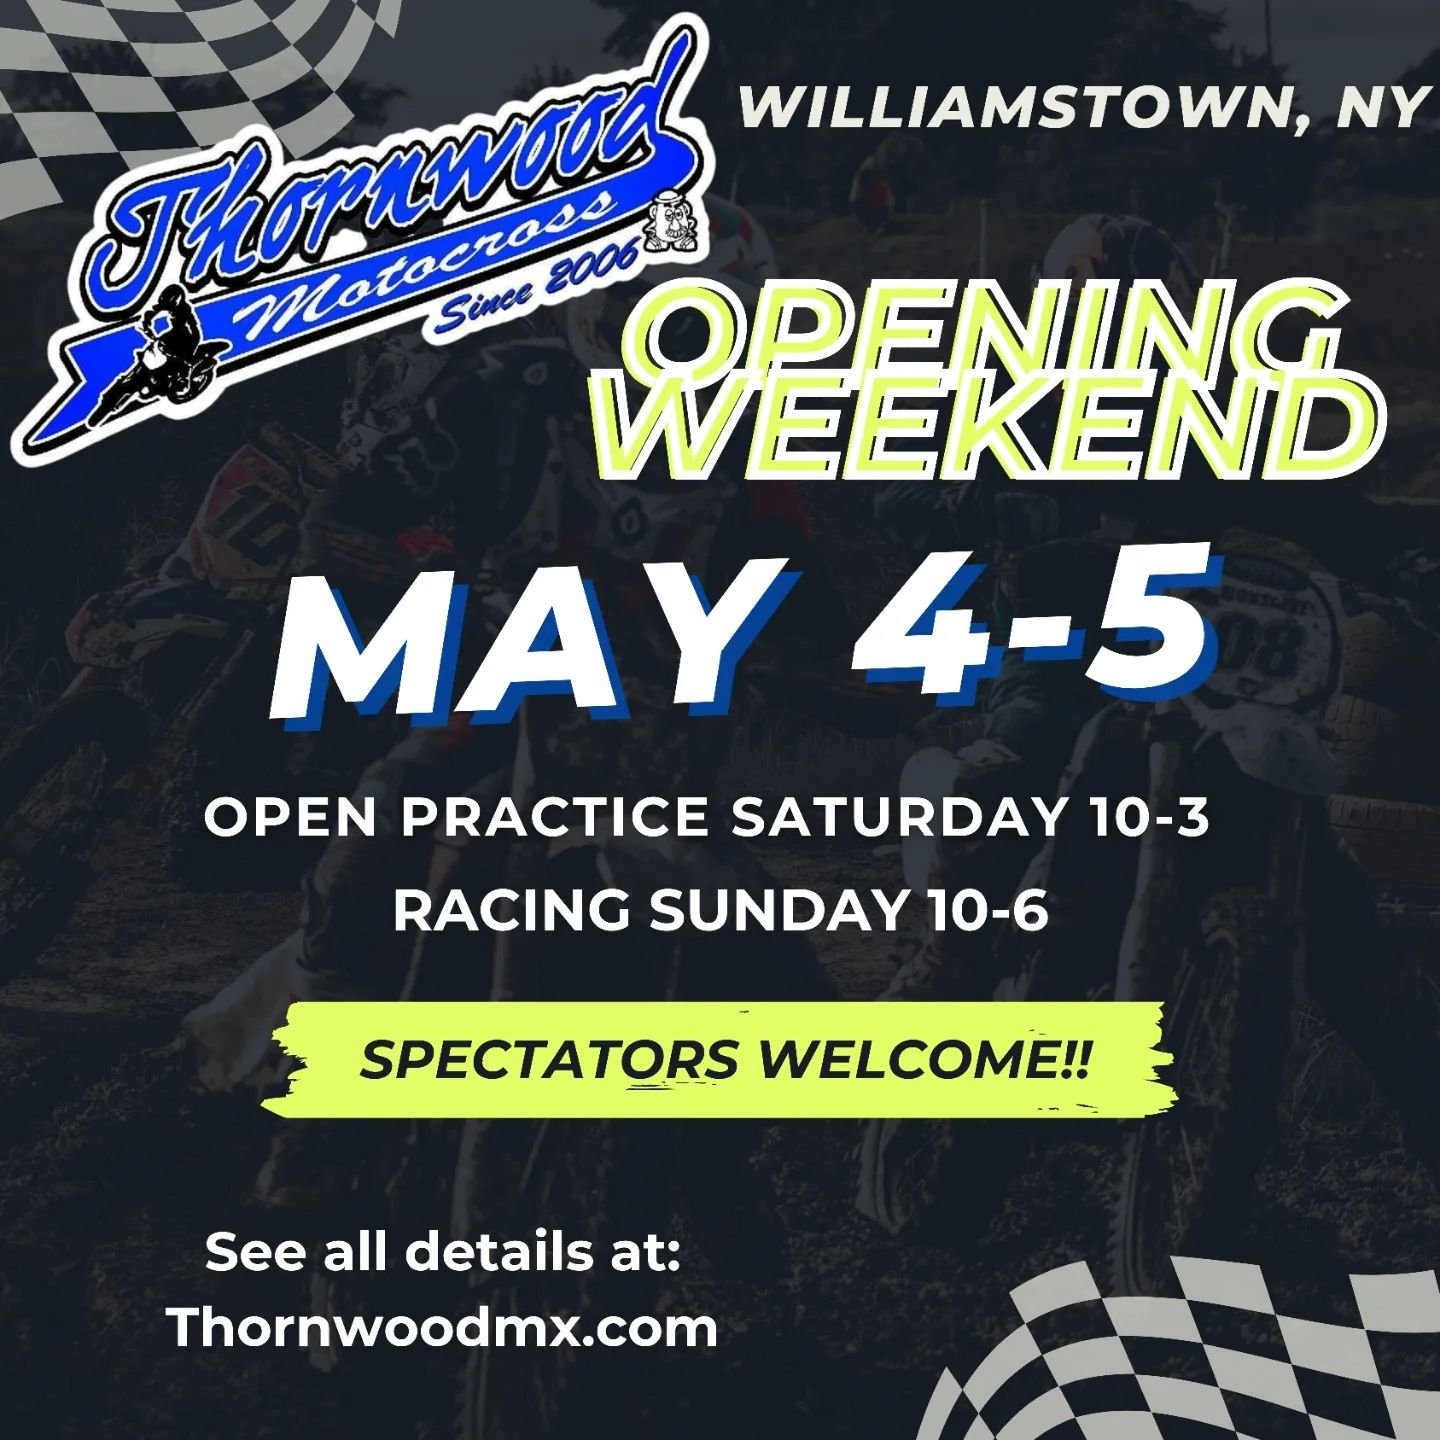 On Saturday May 4th we will have open practice from 10am-3pm.$30 per rider.

All big bikes &amp; quads will be from 10am-1pm.

All 50/65/85/100 &amp; mini quads will be 1pm-3pm.

Sunday May 5th will be Round 4 of the UpState Motocross USMX &amp; WNYM